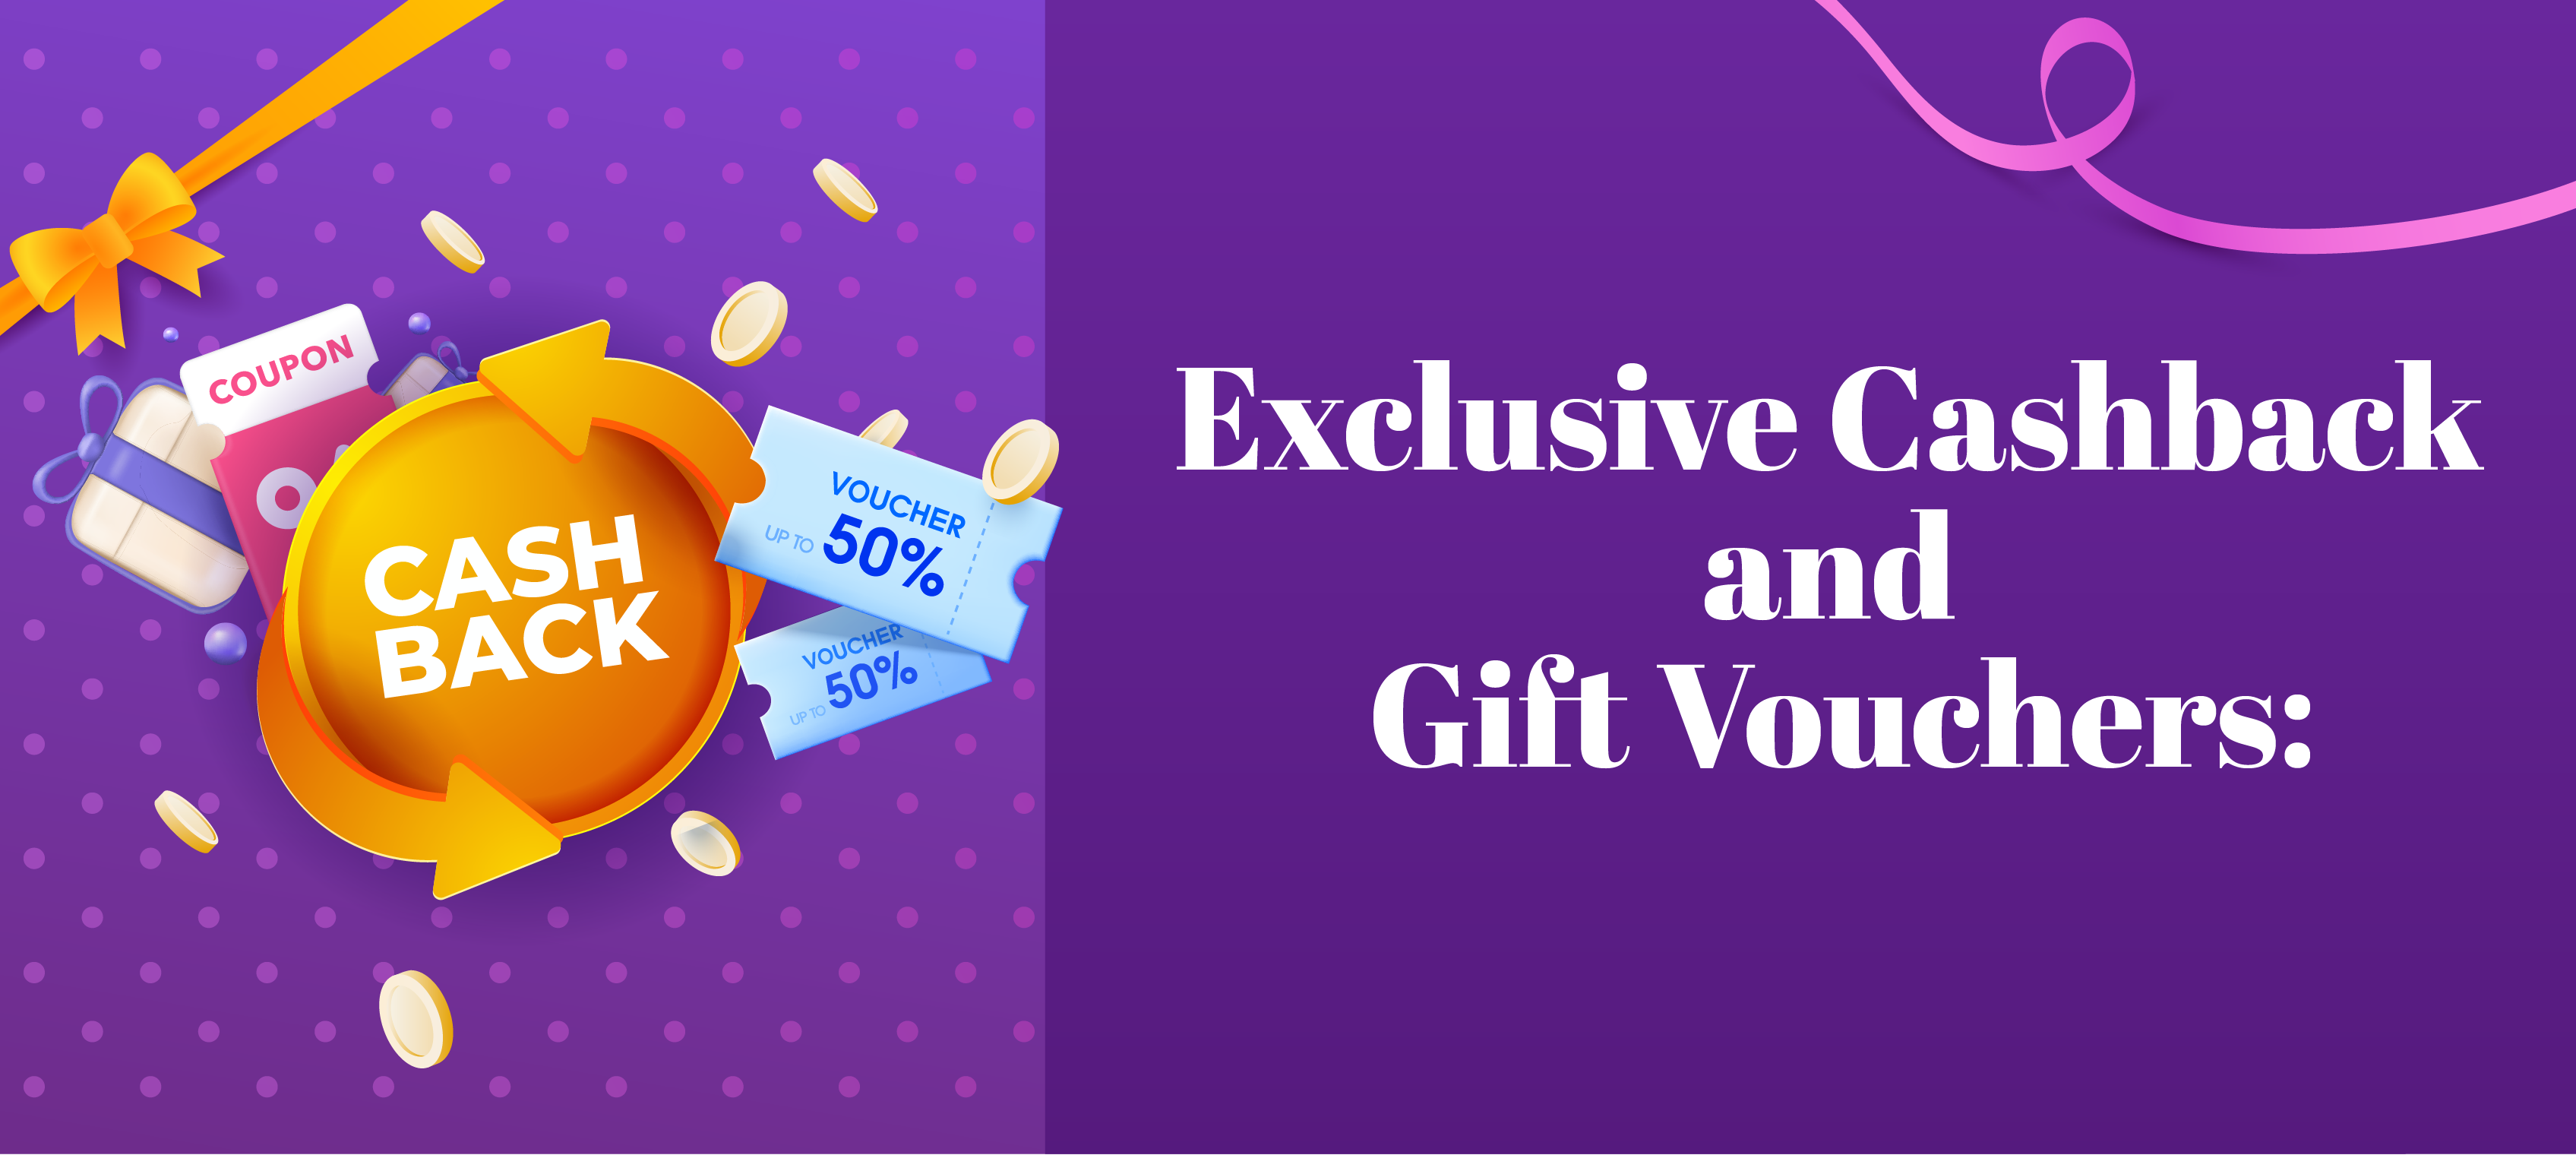 Save with Exclusive Cashback and Gift Vouchers